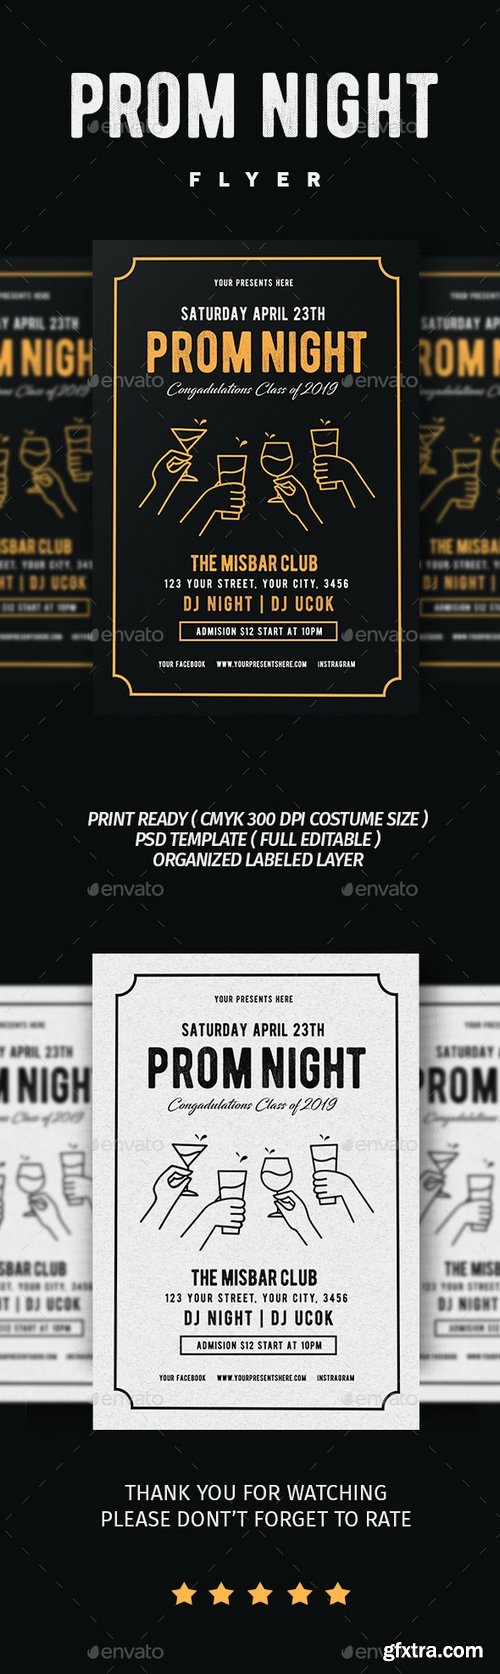 Graphicriver - From Night Party Flyer 21600283